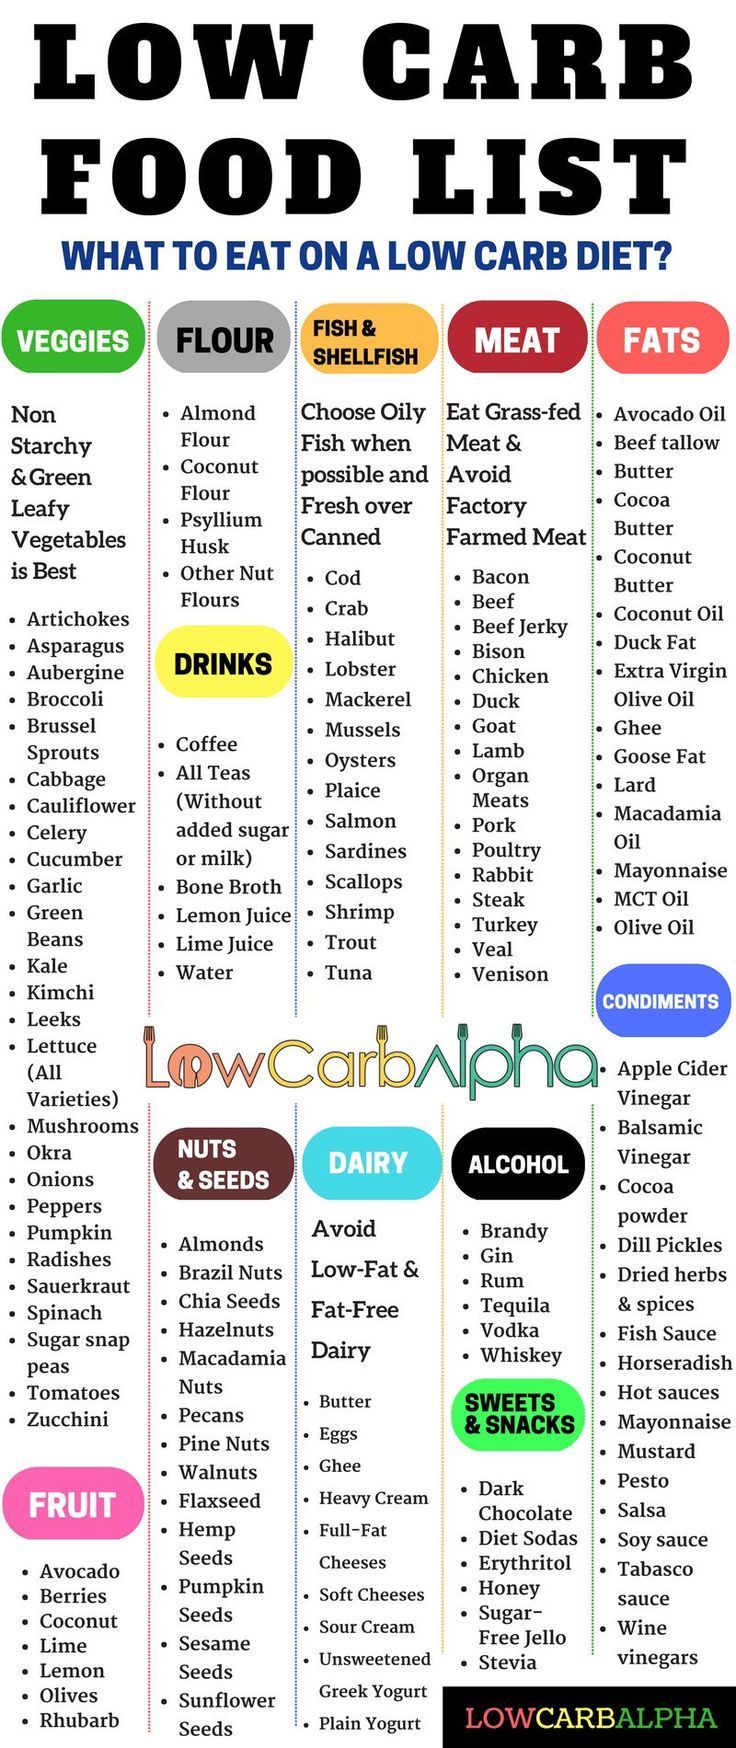 Low Carb Food List - What Can You Eat on a Low Carb High Protein Diet? -   11 diet Fast losing weight ideas